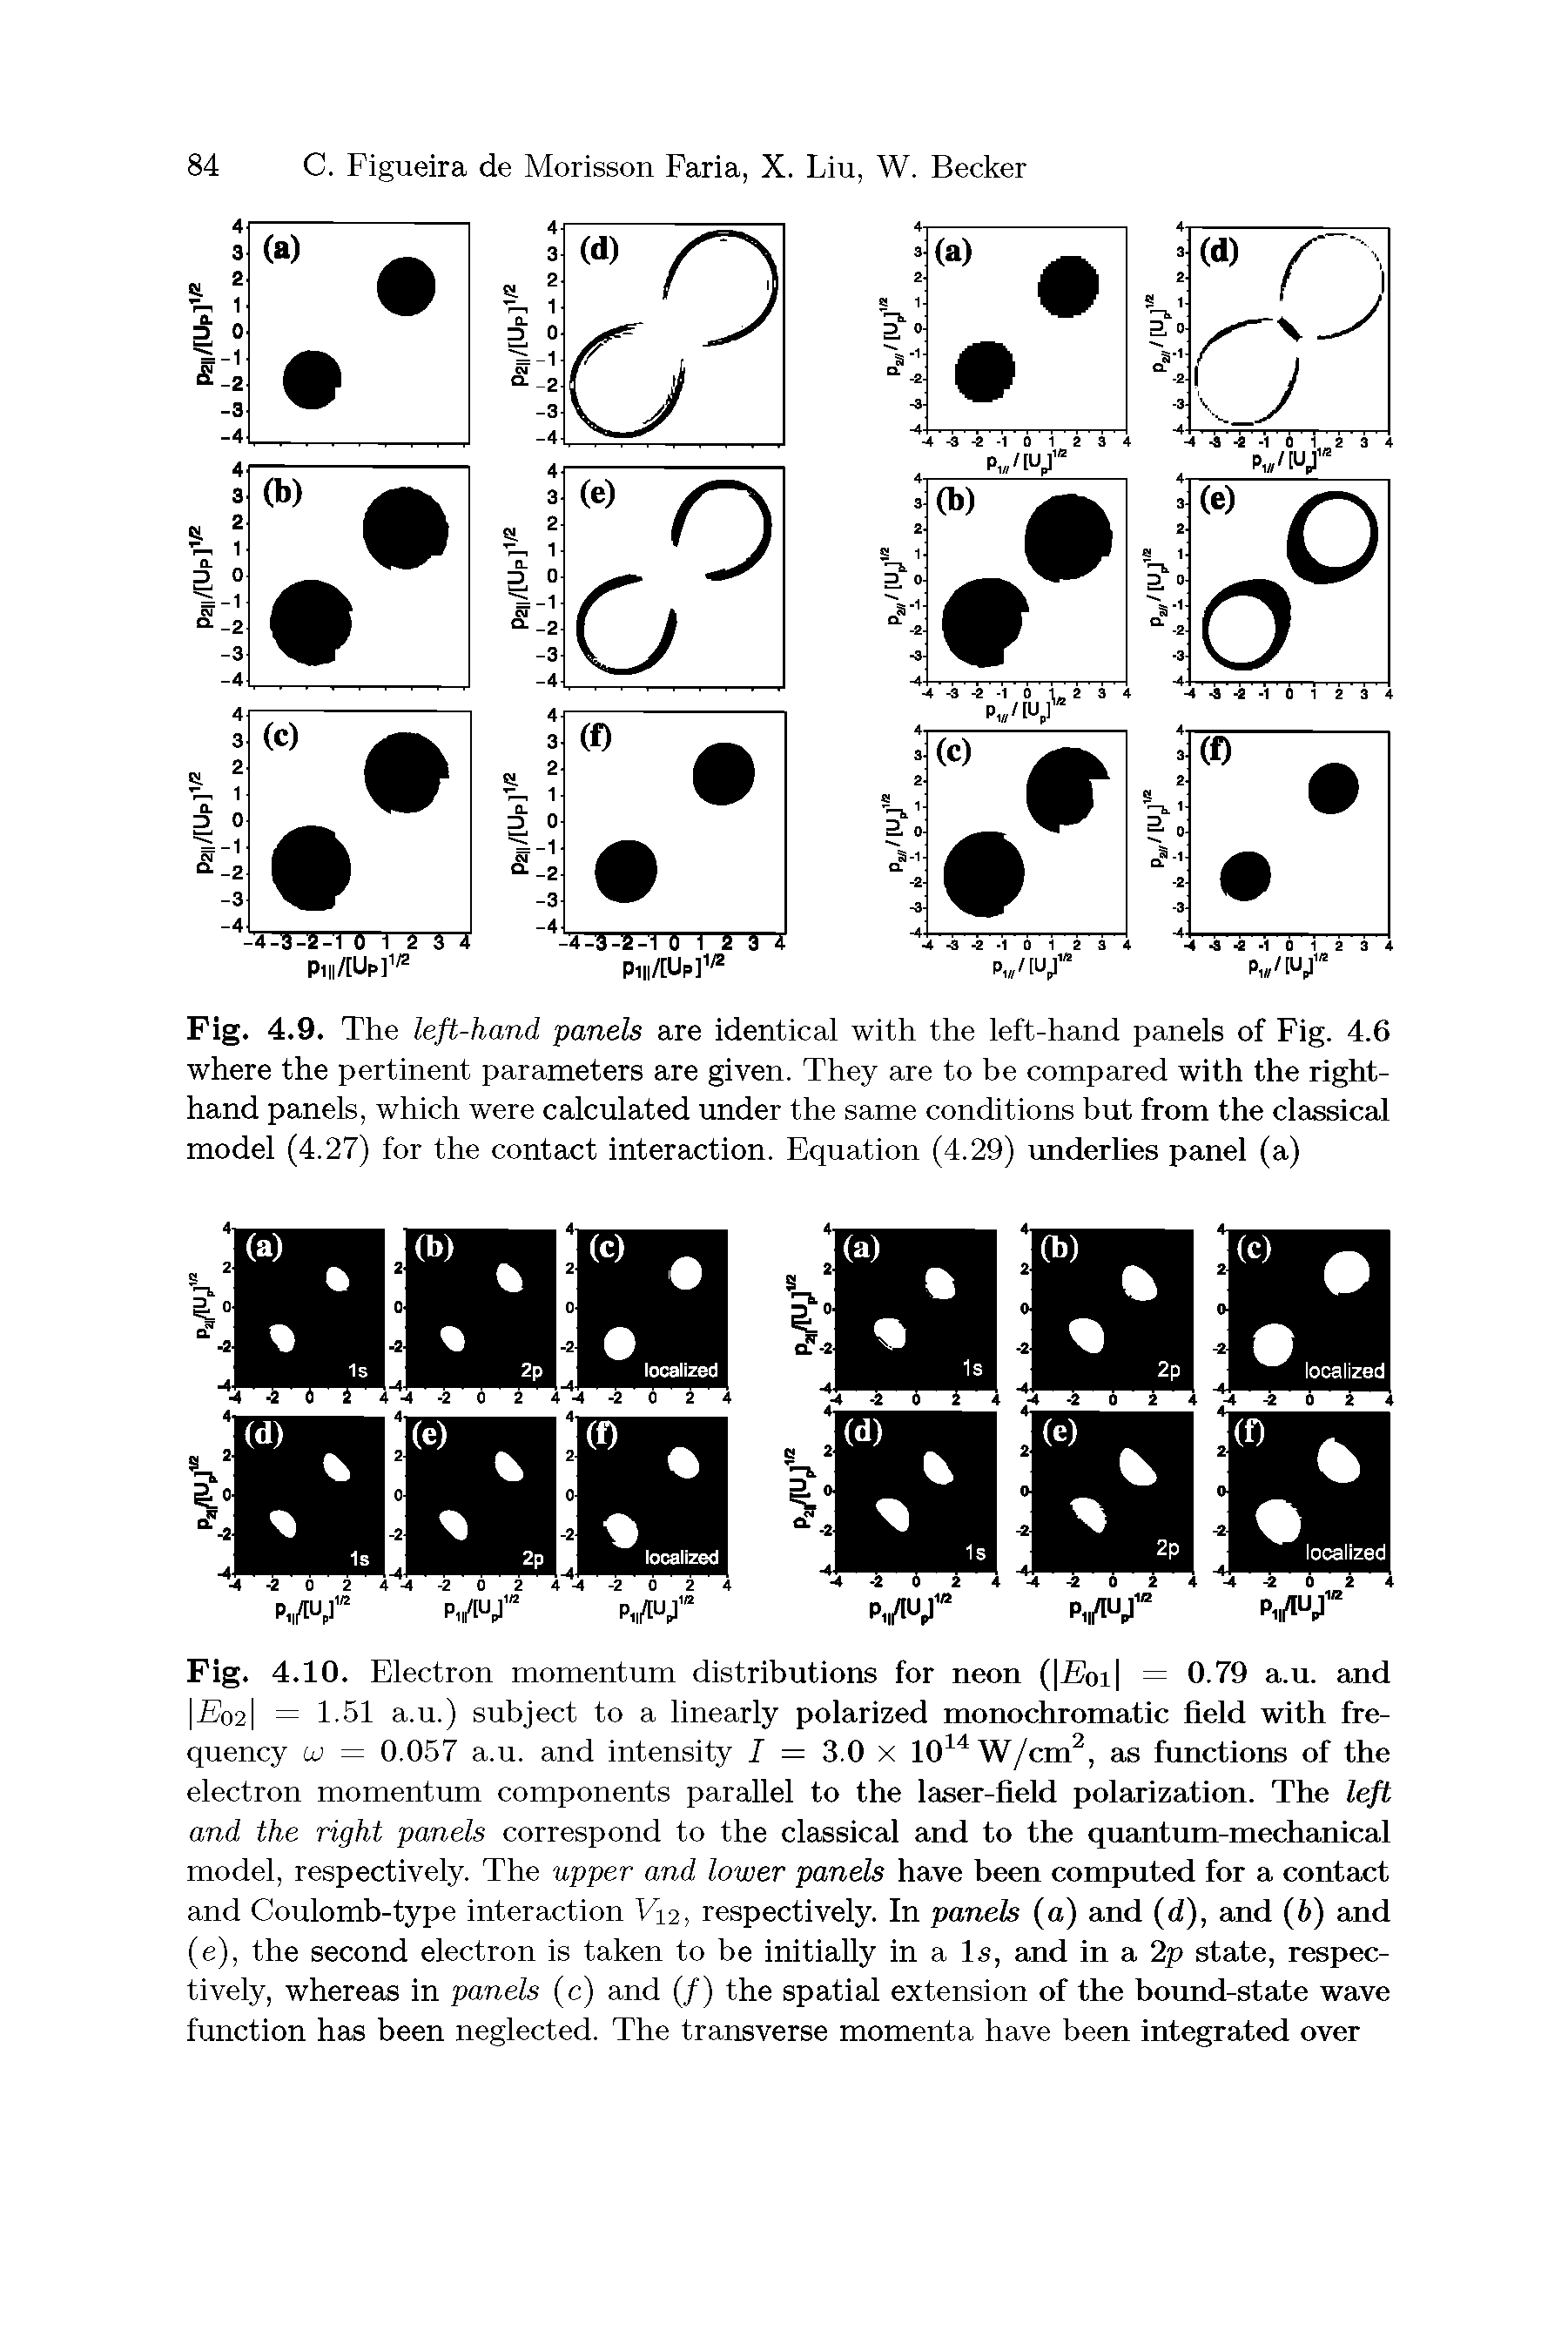 Fig. 4.9. The left-hand panels are identical with the left-hand panels of Fig. 4.6 where the pertinent parameters are given. They are to be compared with the right-hand panels, which were calculated under the same conditions but from the classical model (4.27) for the contact interaction. Equation (4.29) underlies panel (a)...